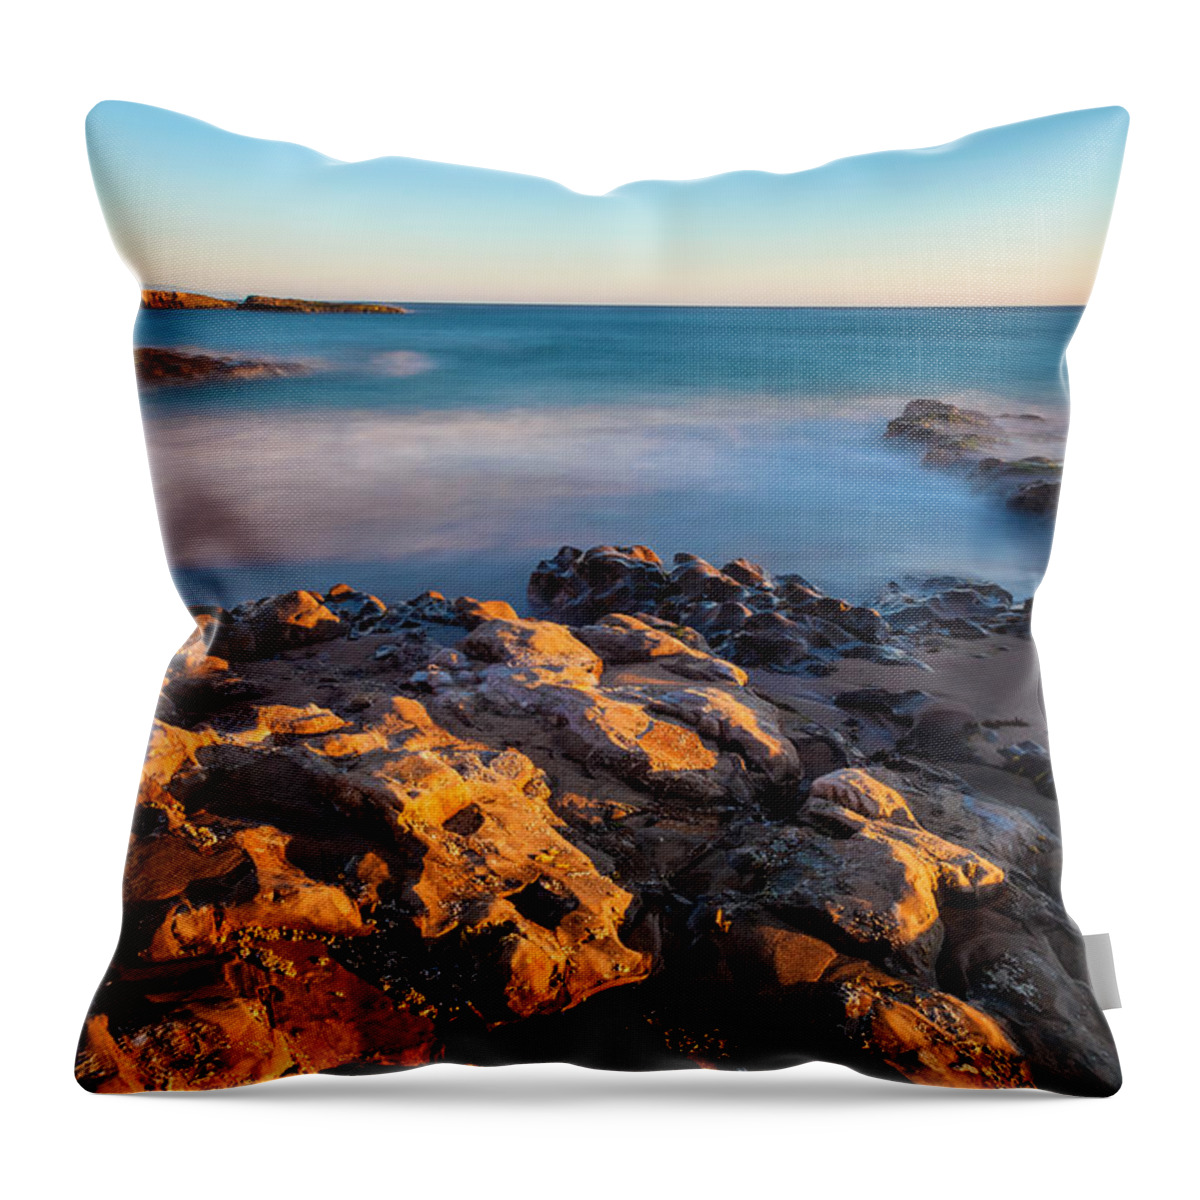 Landscape Throw Pillow featuring the photograph Contemplates by Jonathan Nguyen